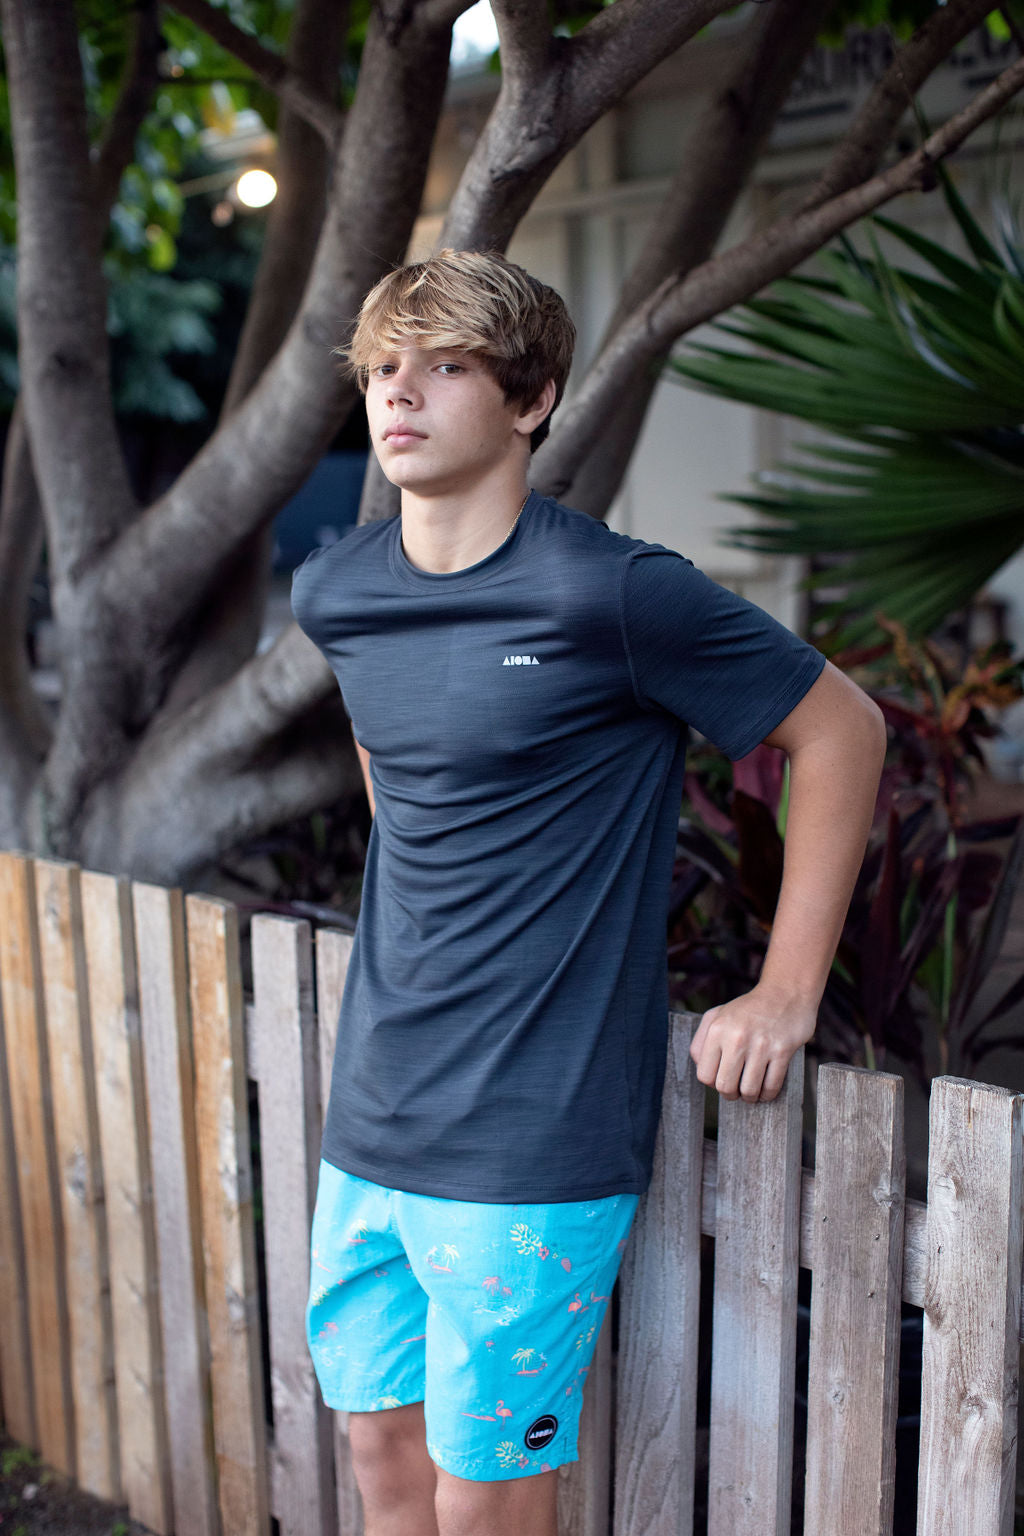 Young surfer leaning against wooden fence wearing Aloha Surf Shapes "Shorey" youth swim trunks